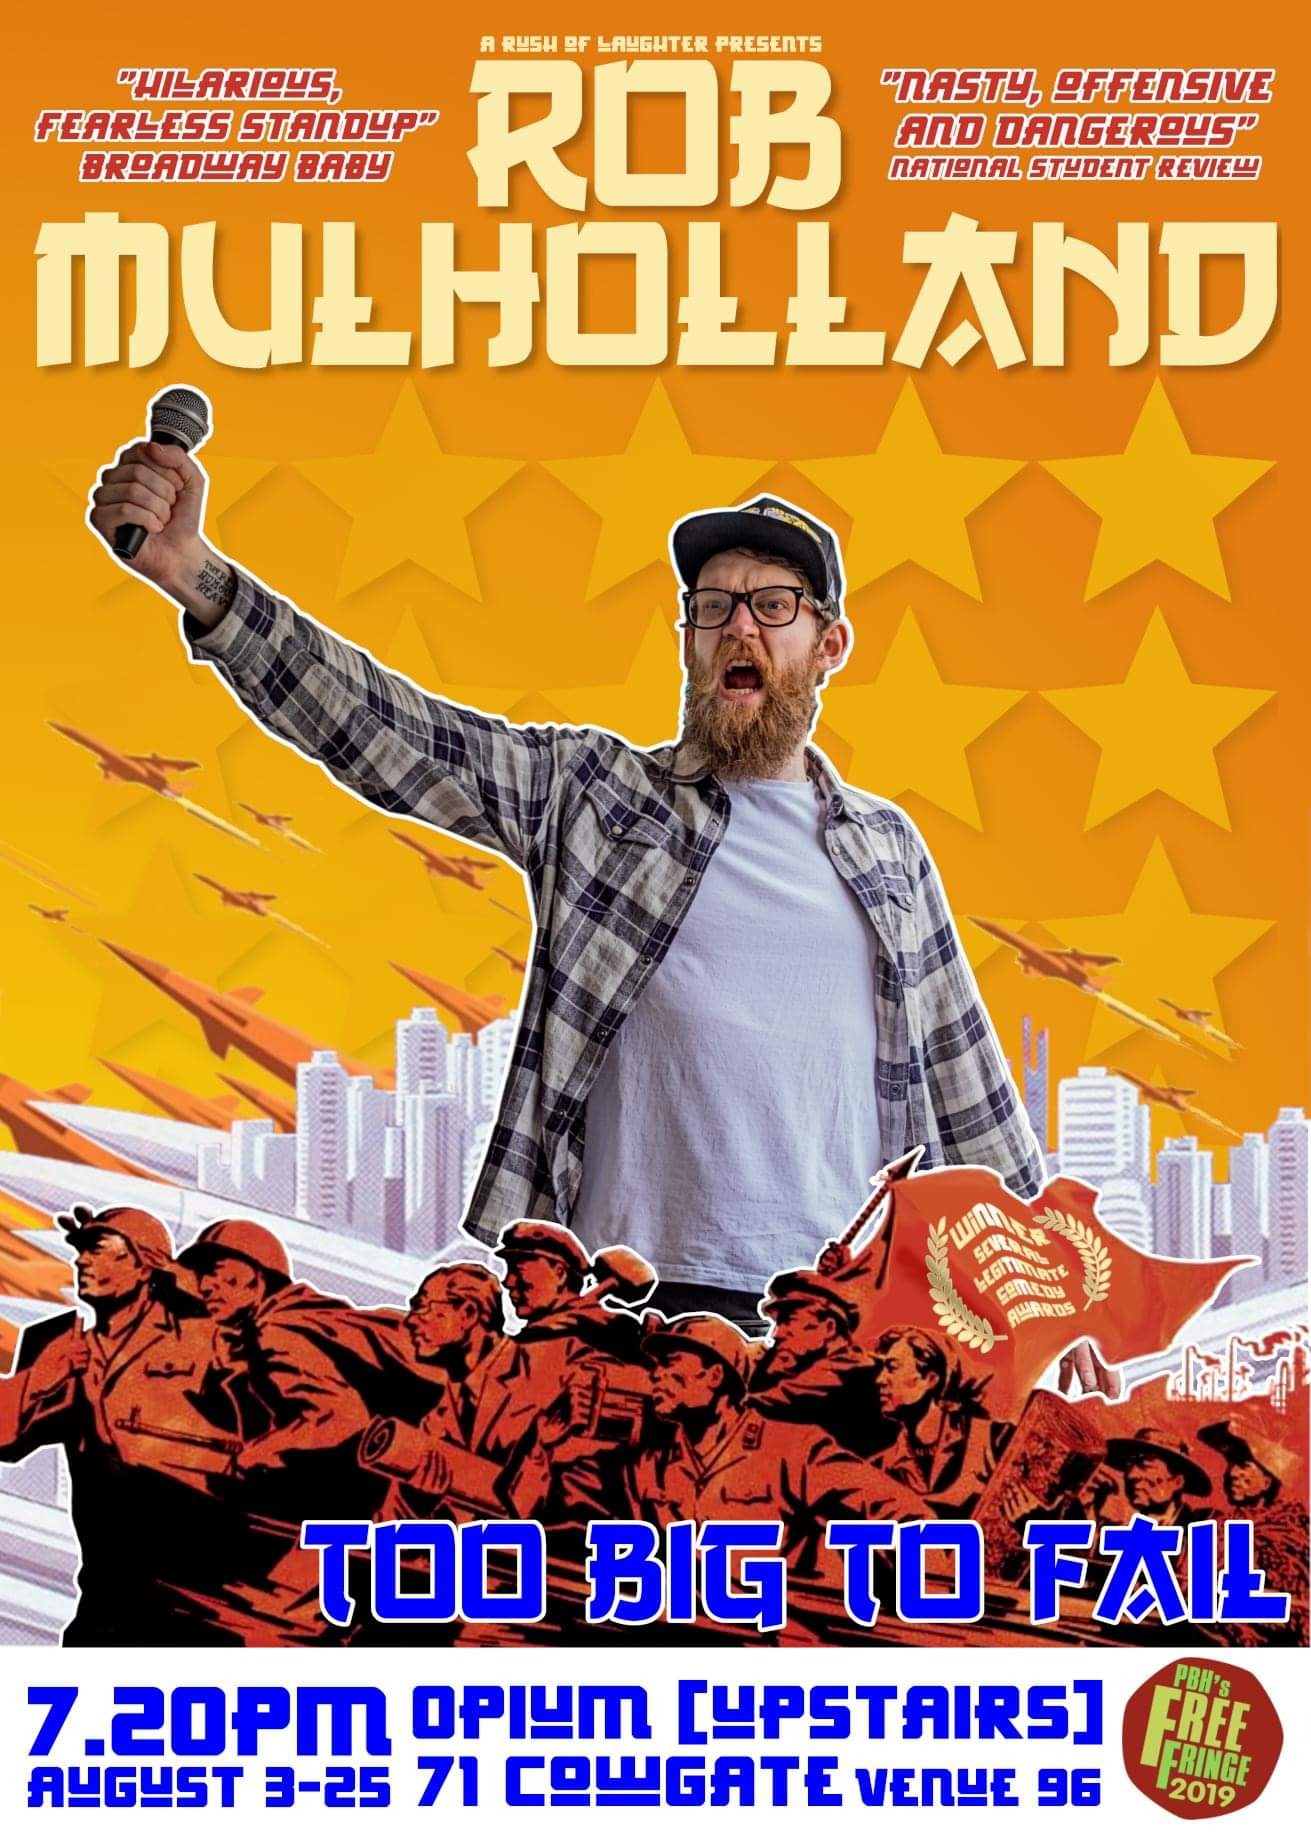 The poster for Rob Mulholland: Too Big To Fail